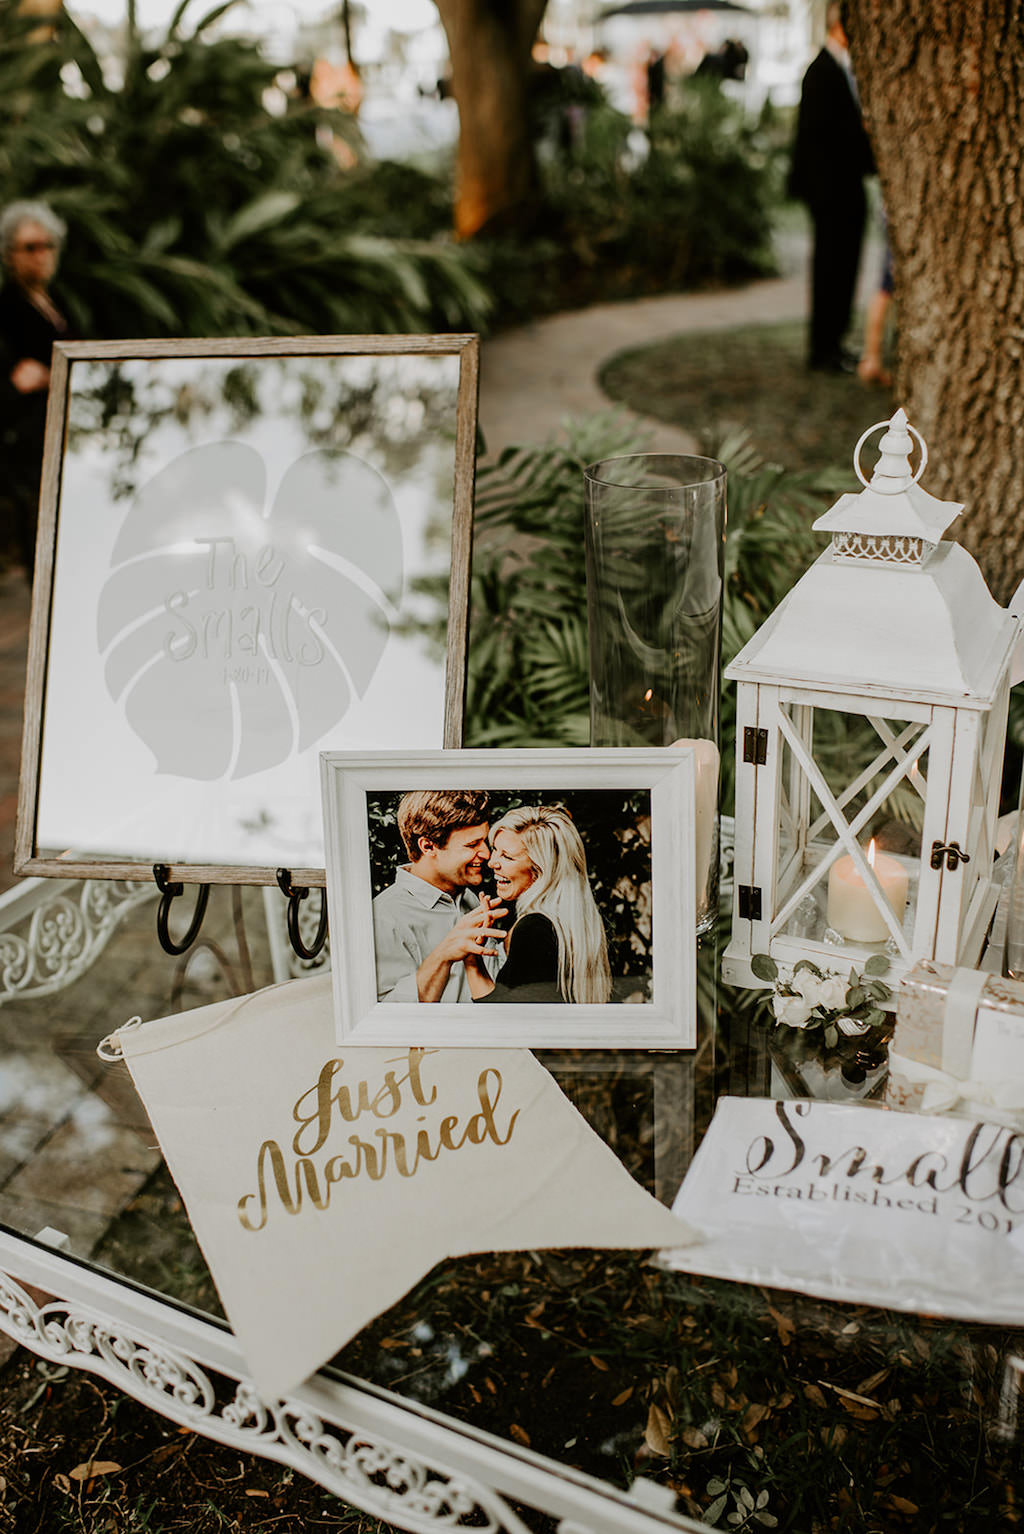 Wedding Ceremony Welcome Table Decor, White Lanterns, Personal Picture and Frame, Montsera Leaf Print in Frame